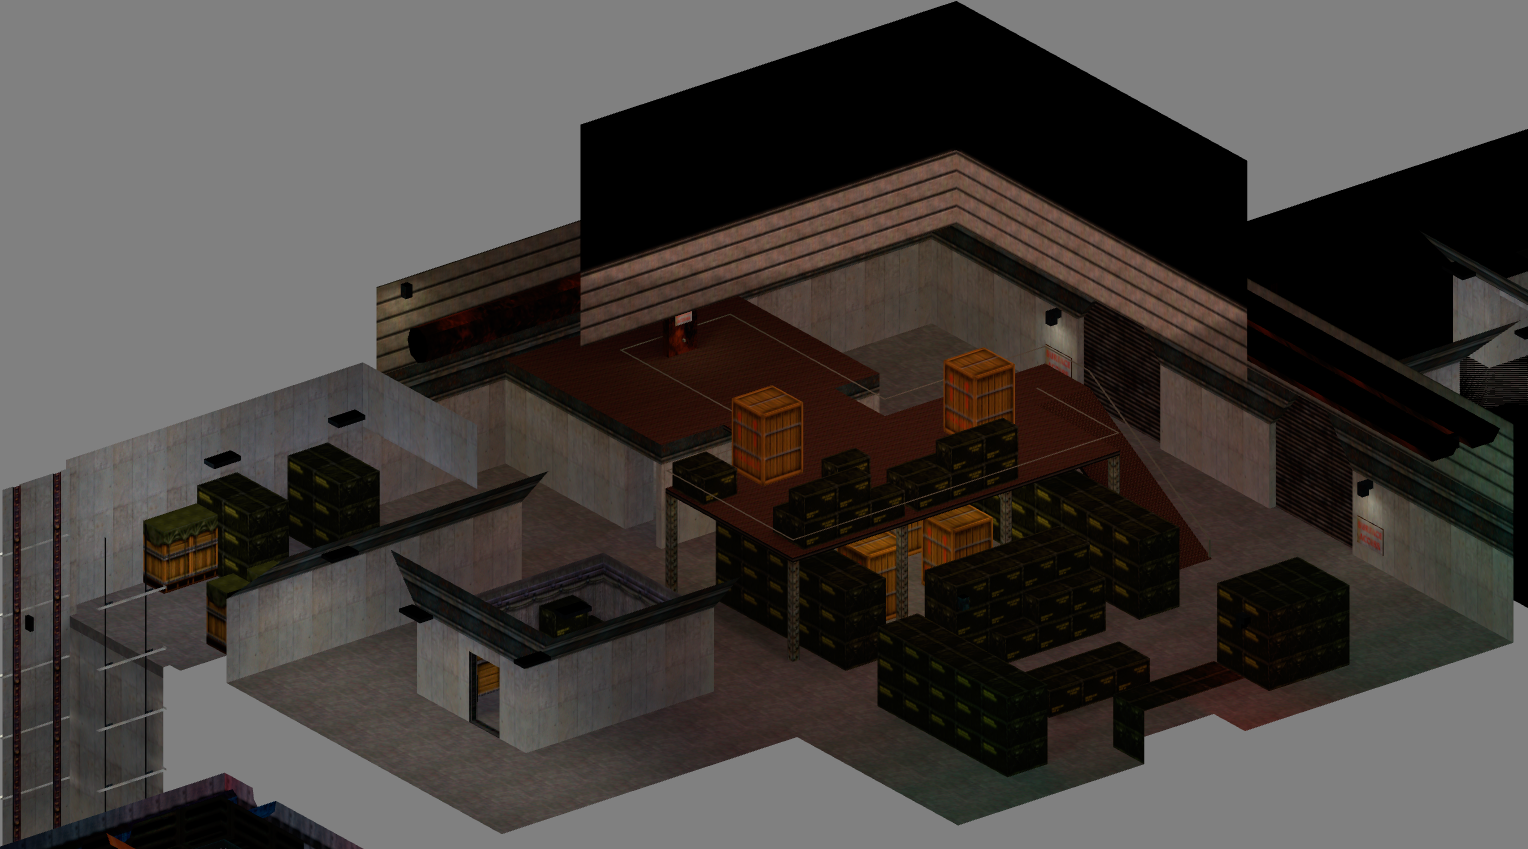 Half-Life Reimagined As An Isometric Game